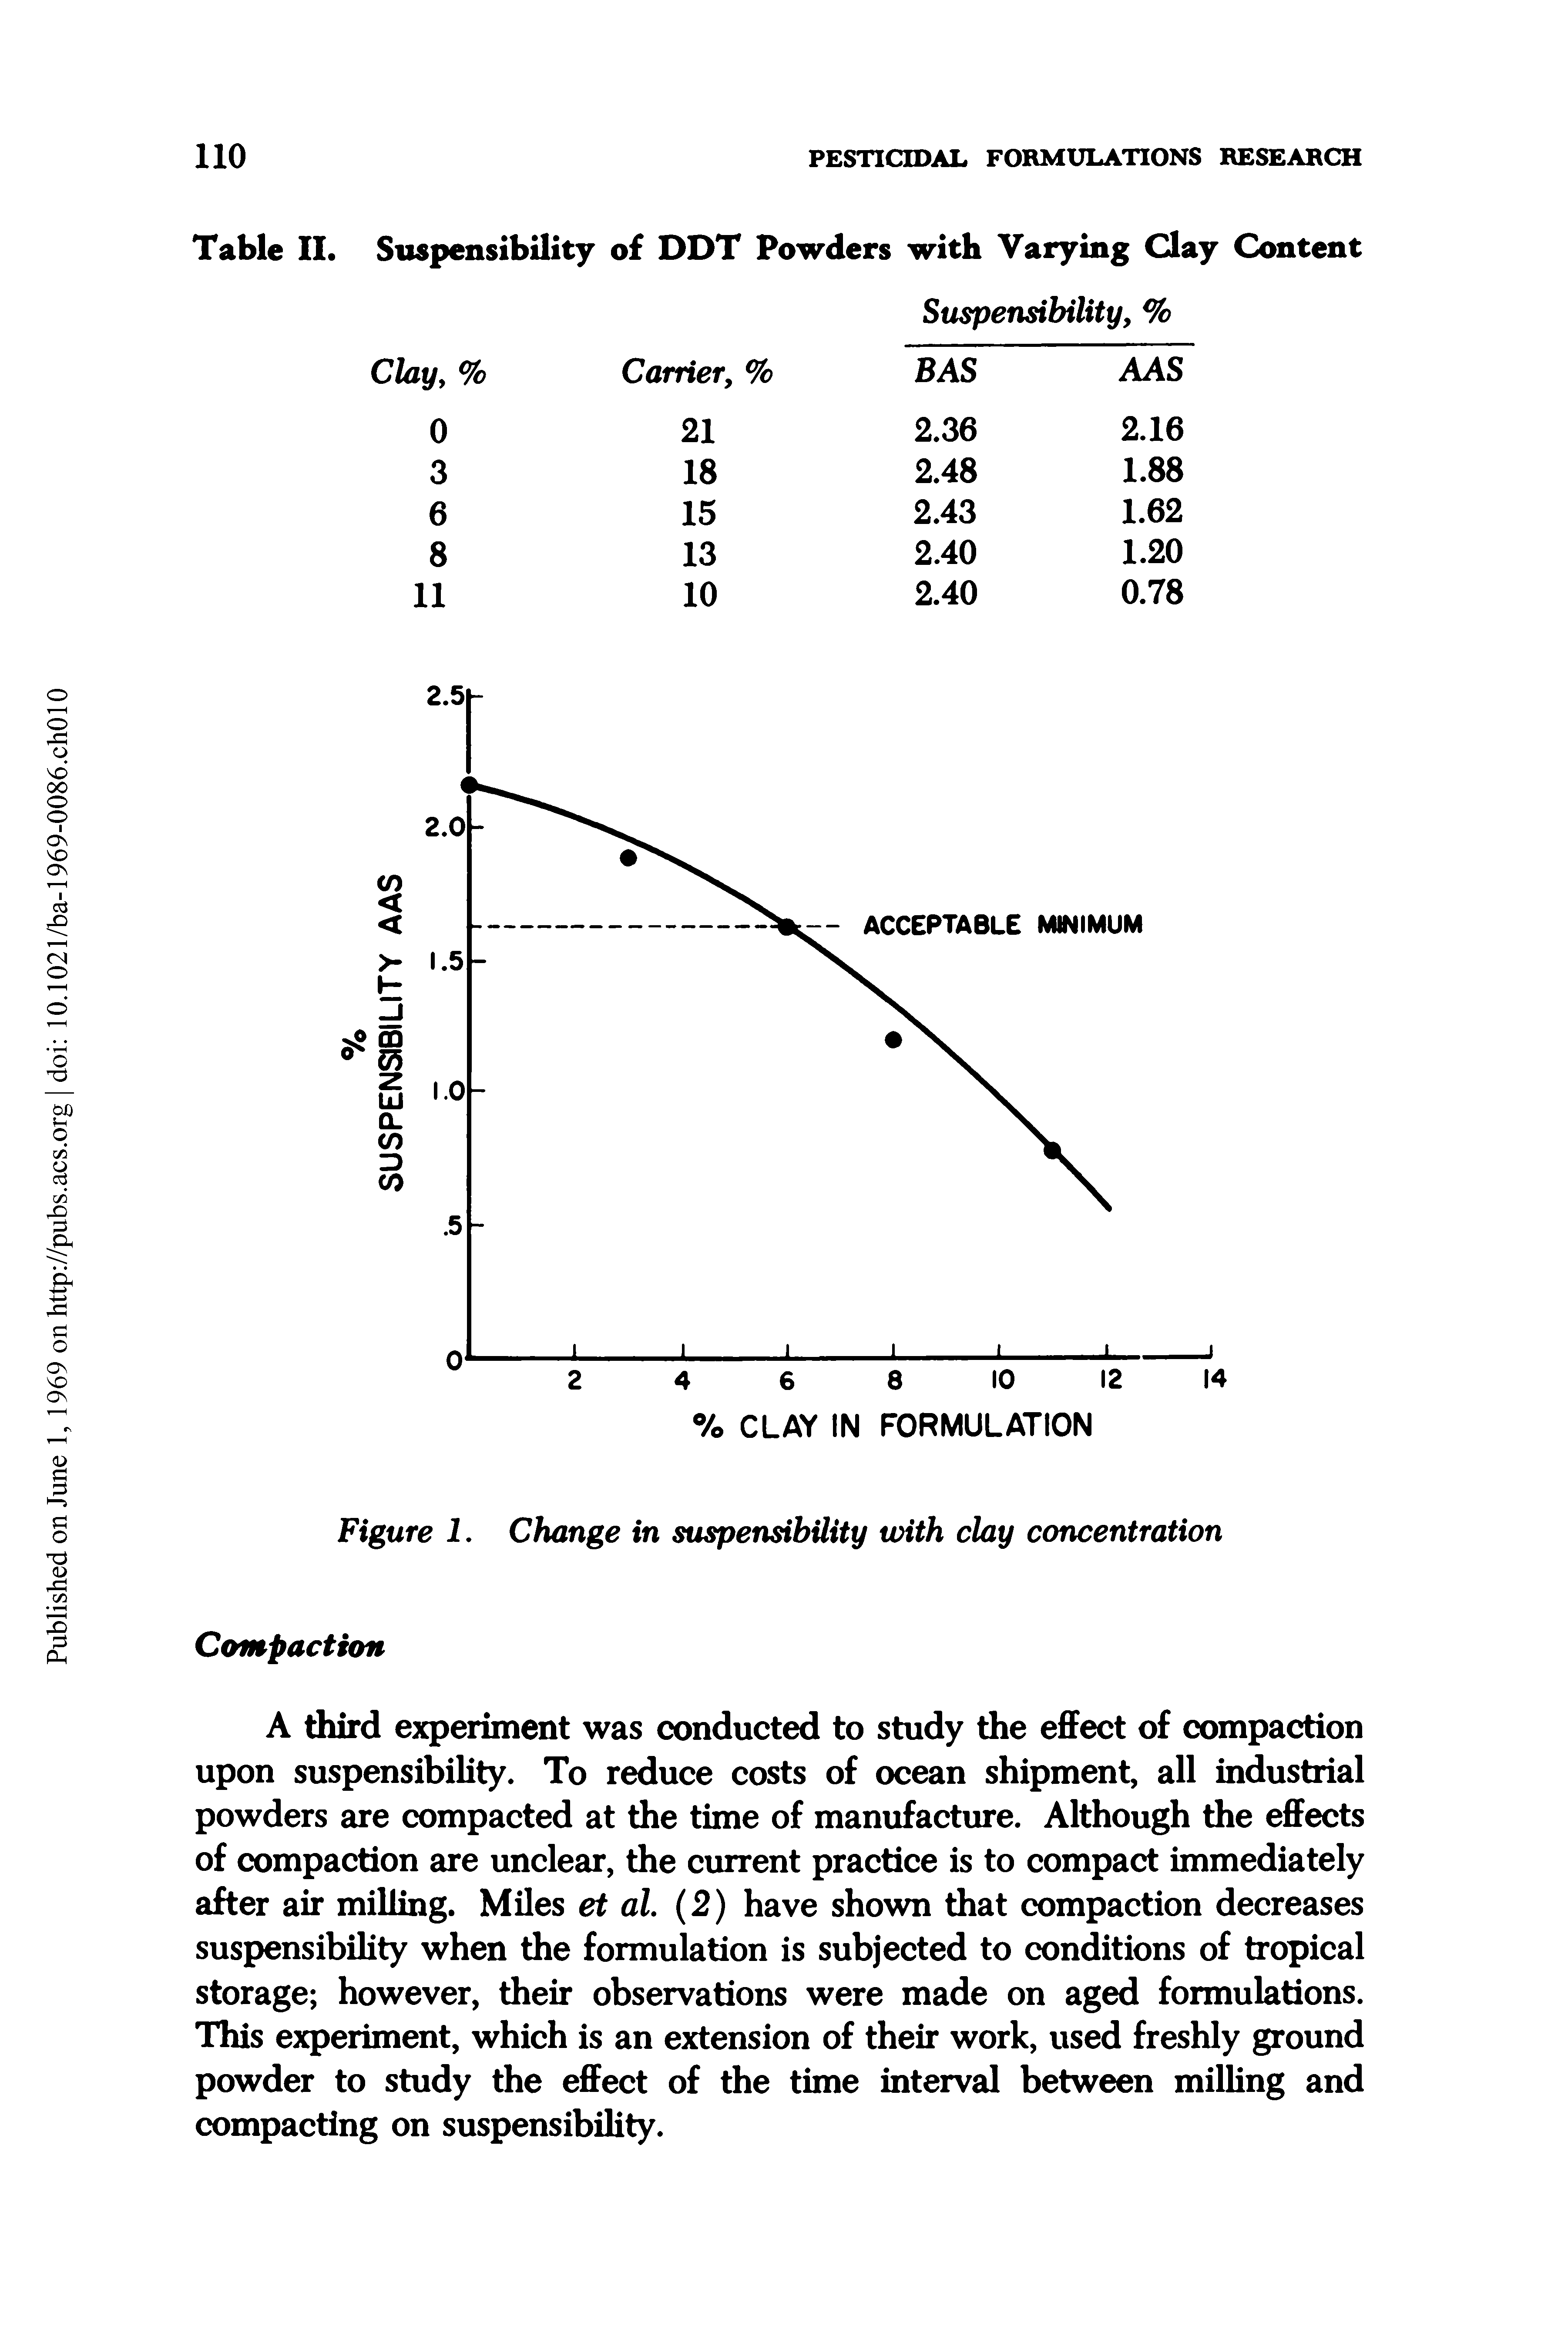 Figure 1. Change in suspensibility with clay concentration...